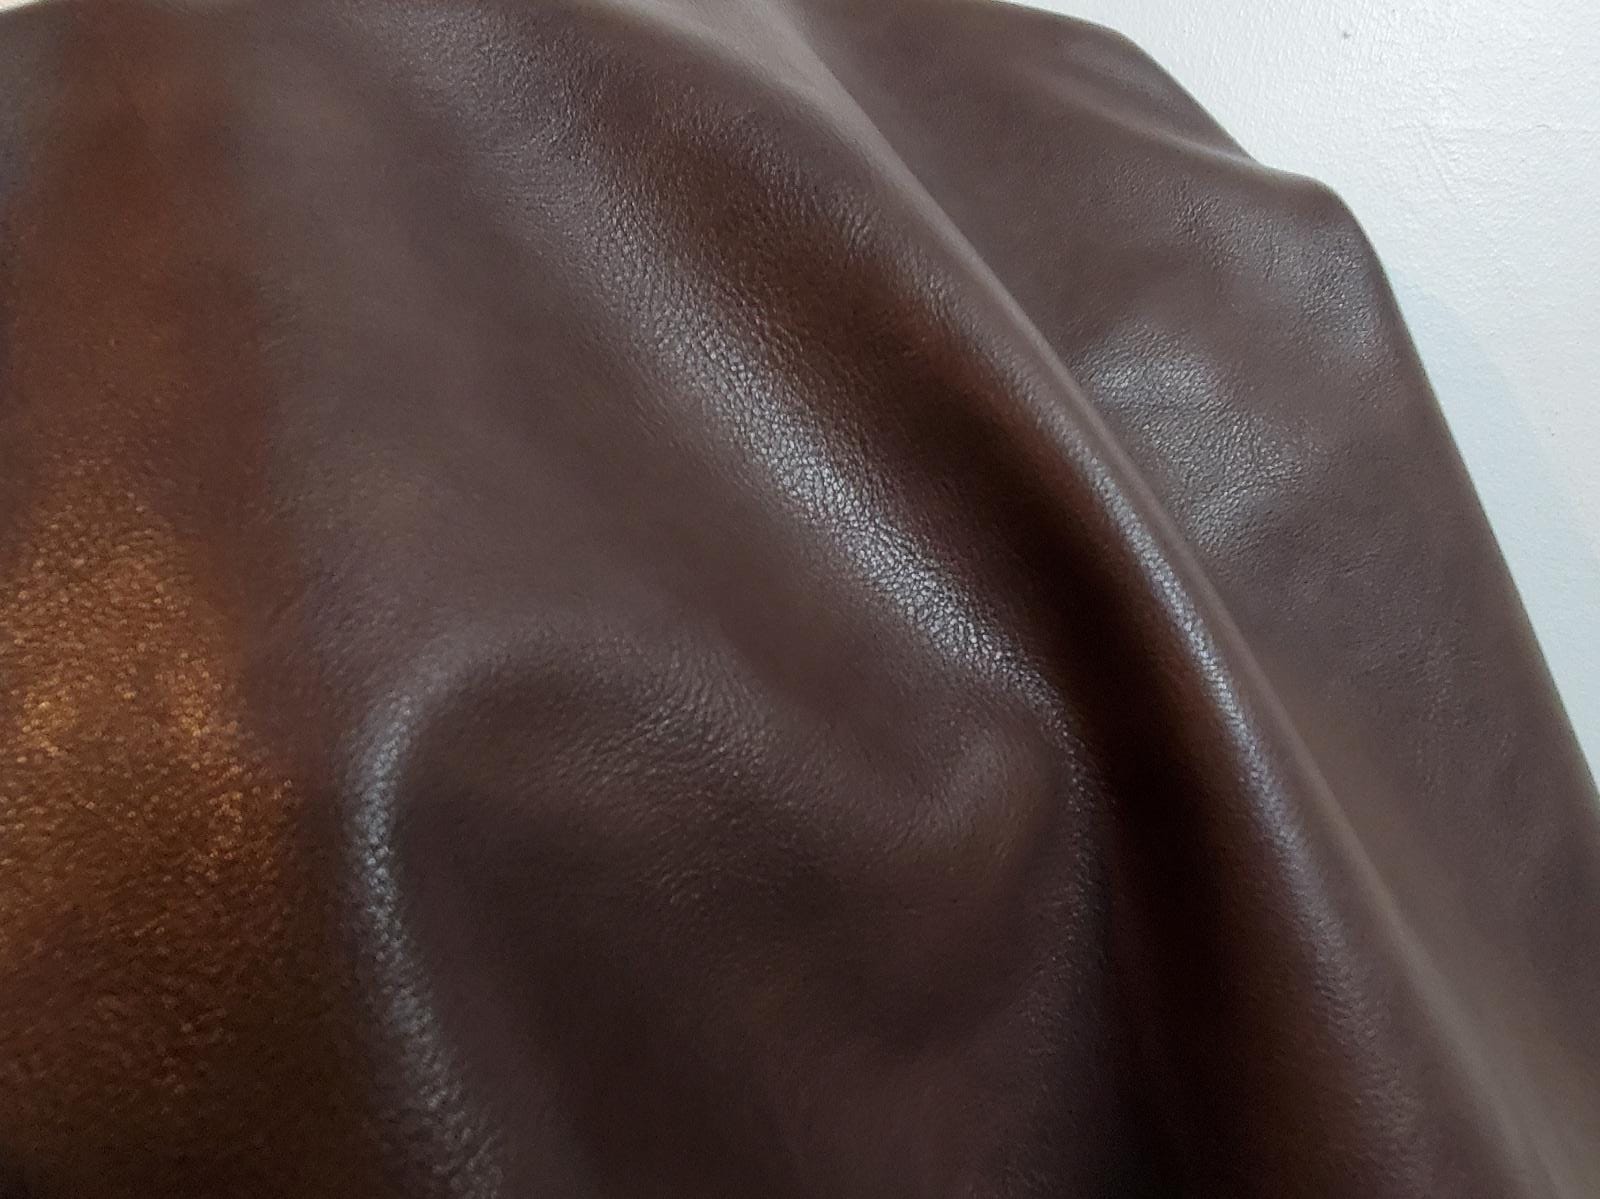 Brown 2 tone pebblegrain Faux Vegan Leather  Faux vegan leather by the yard sheets distressed leather fabric for upholstery 30,000 Double Rubs vinyl sheets nappa leather crafts bookbinding books furniture fabrics uphilstery fuax material pu pleather faiux learher cruelty free nappa seat dark